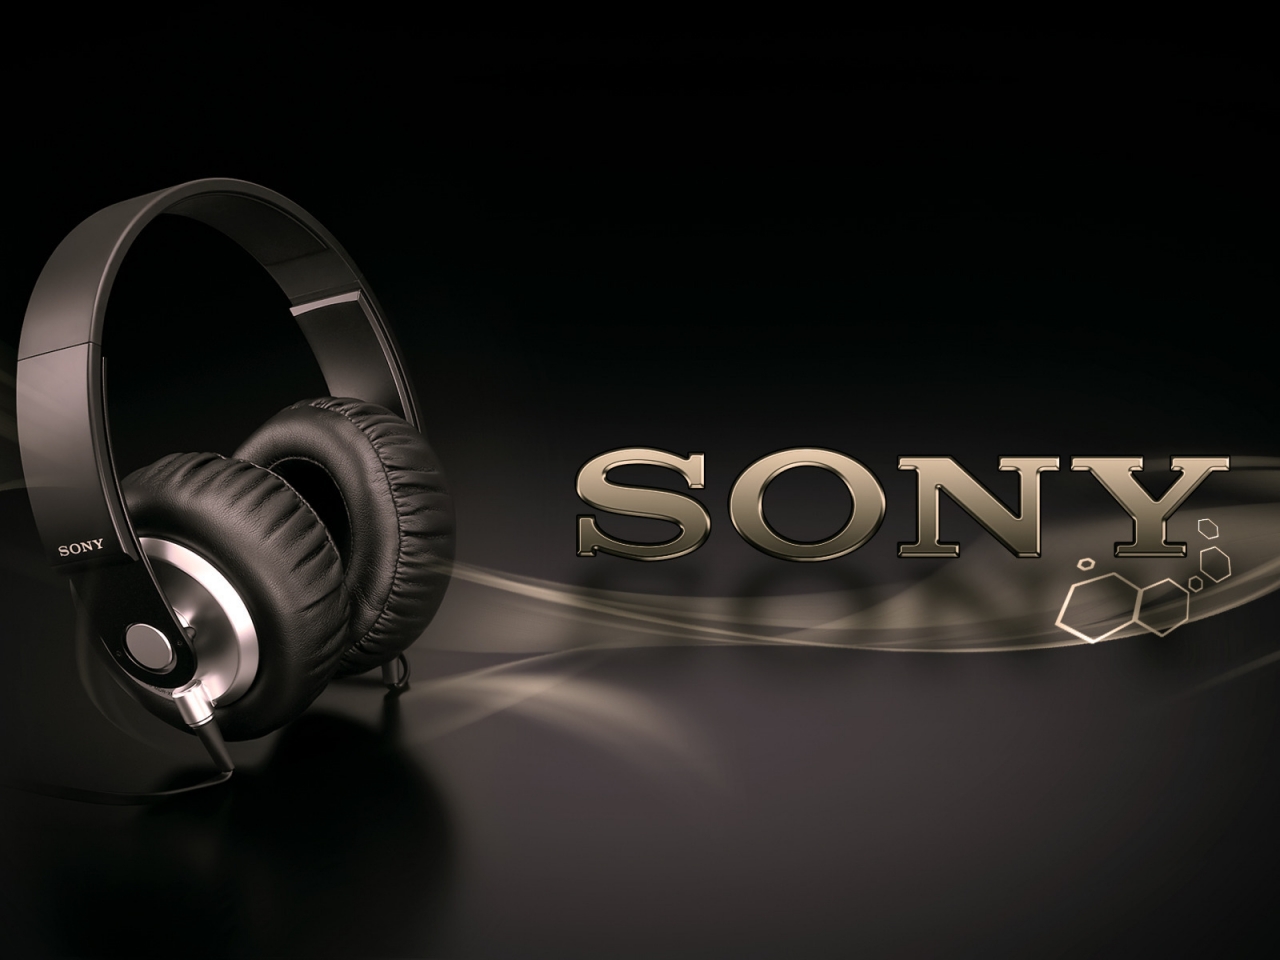 Cool Sony Headphones for 1280 x 960 resolution